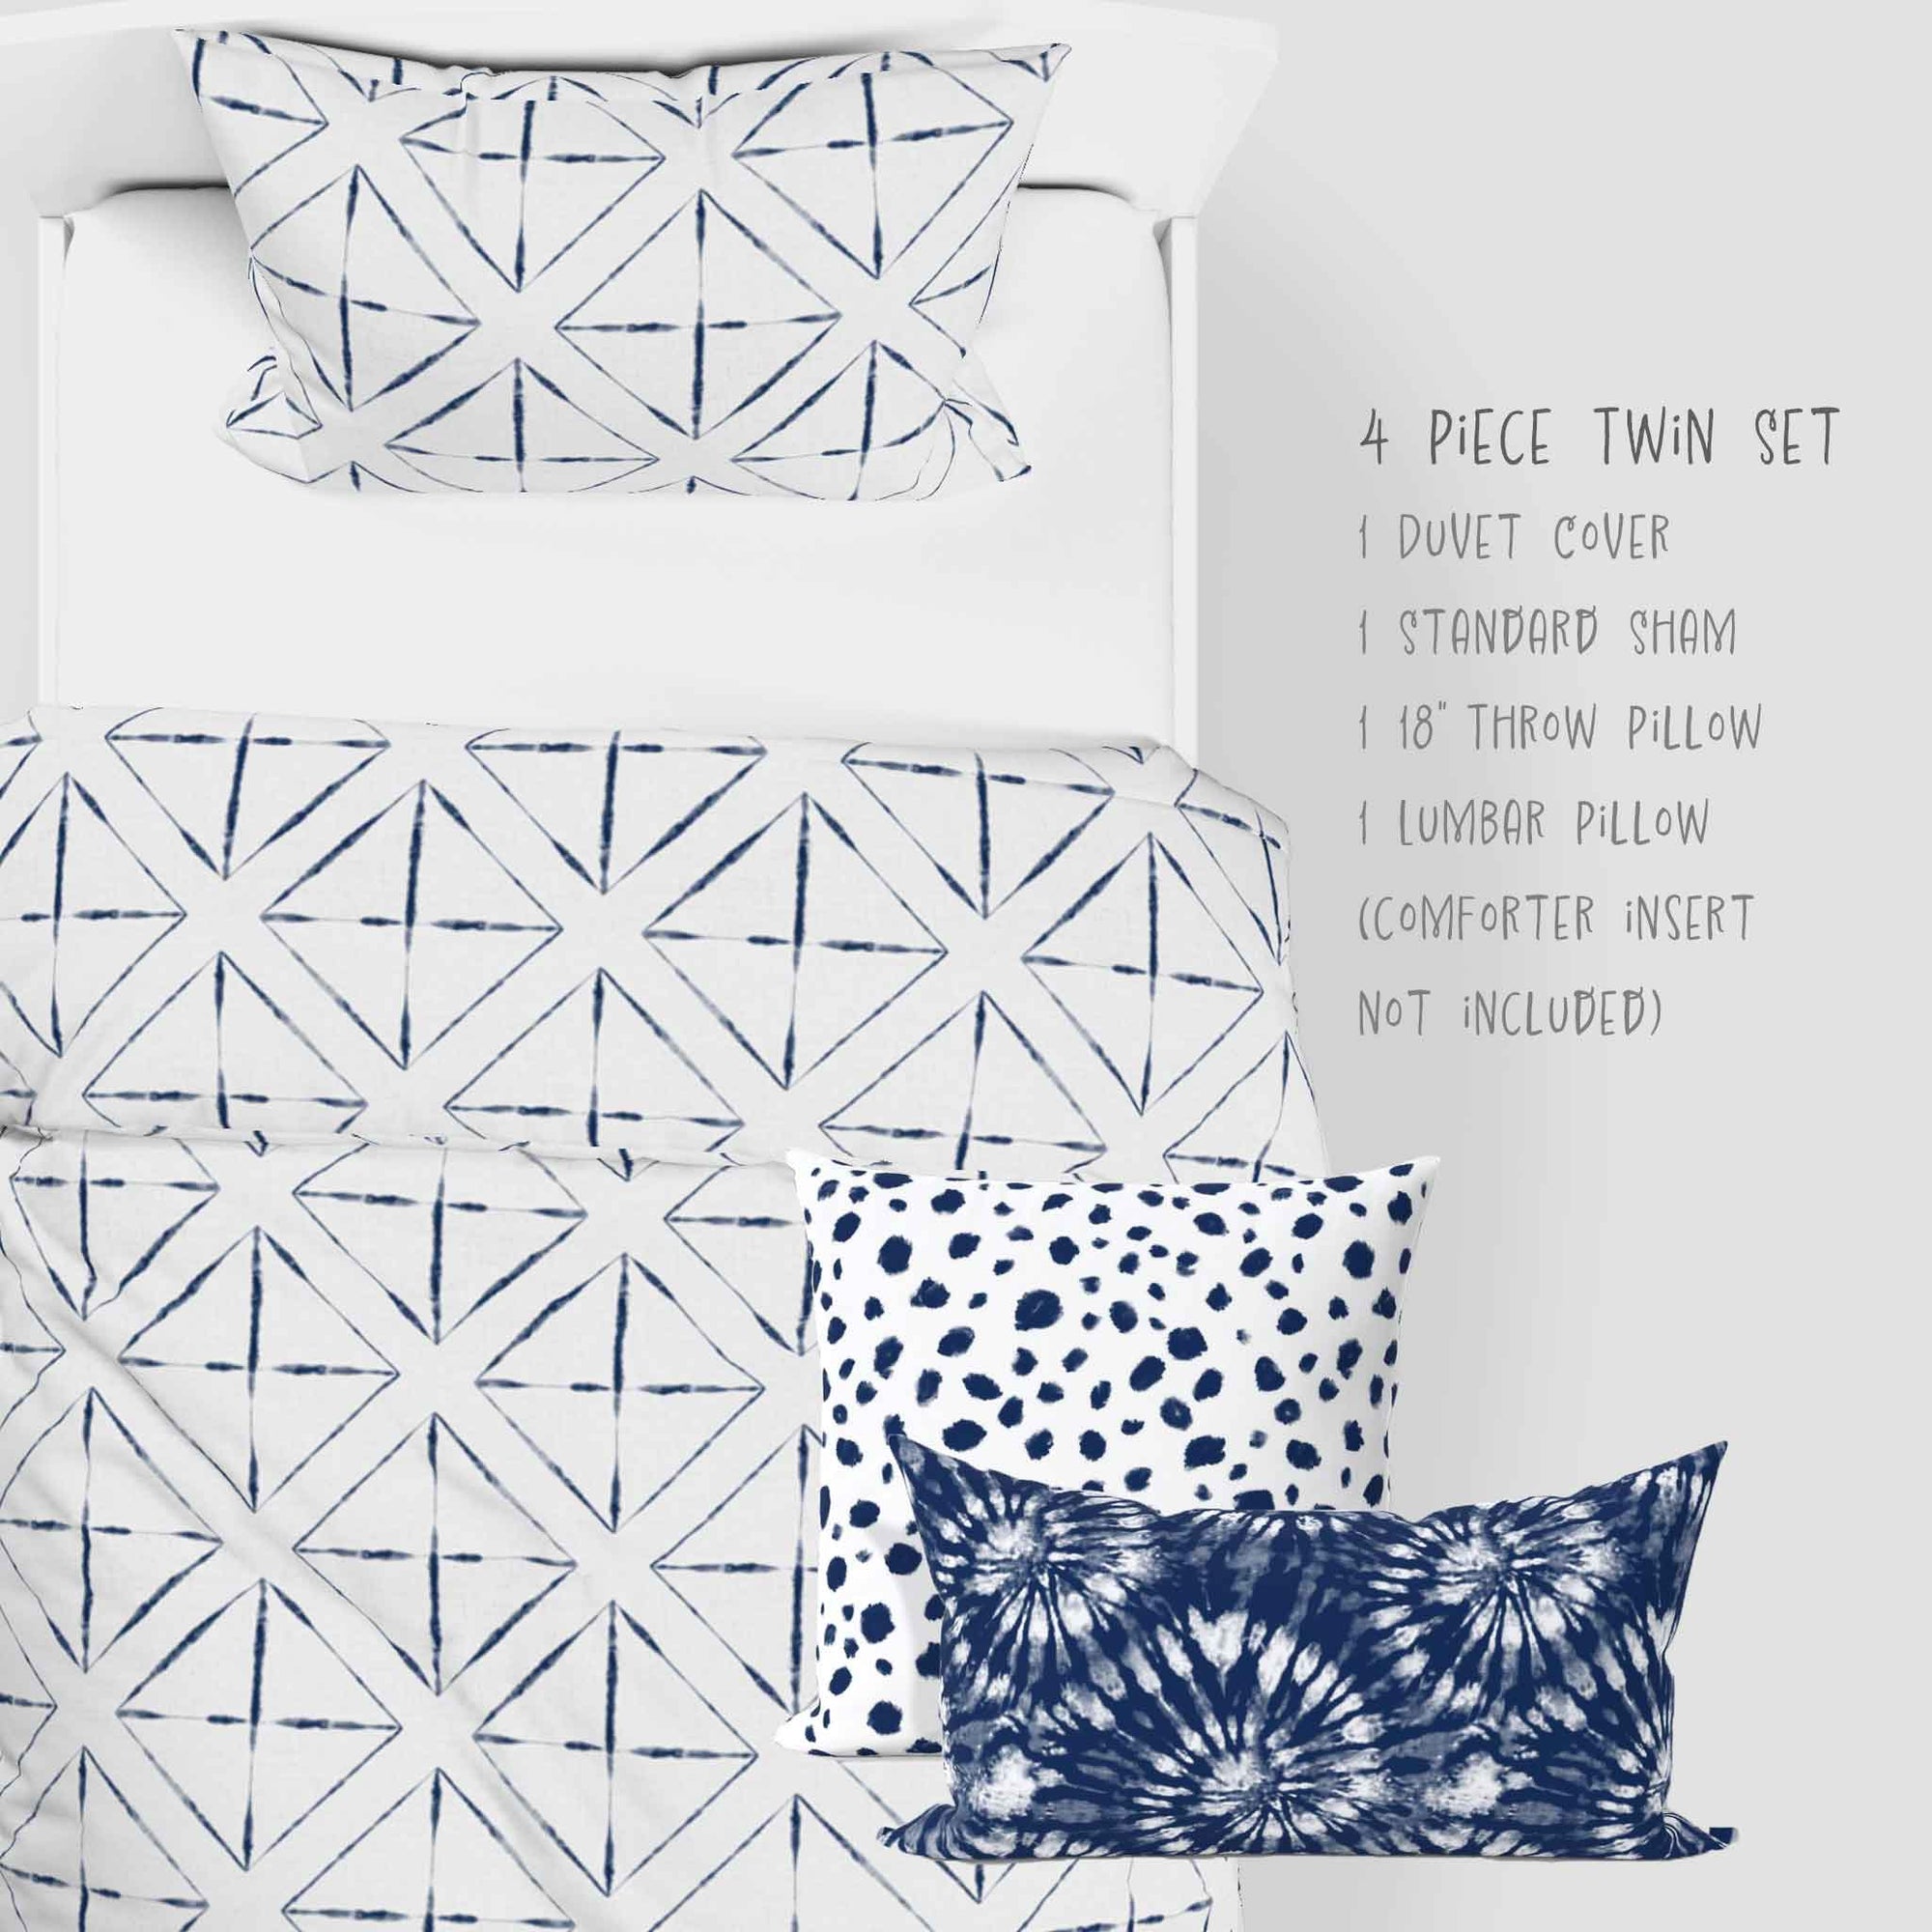 4 piece twin bedding set with the Shibori Indigo Cabana pattern. Includes 1 standard sham, 1 18 inch throw pillow and one lumbar pillow for a twin size bed